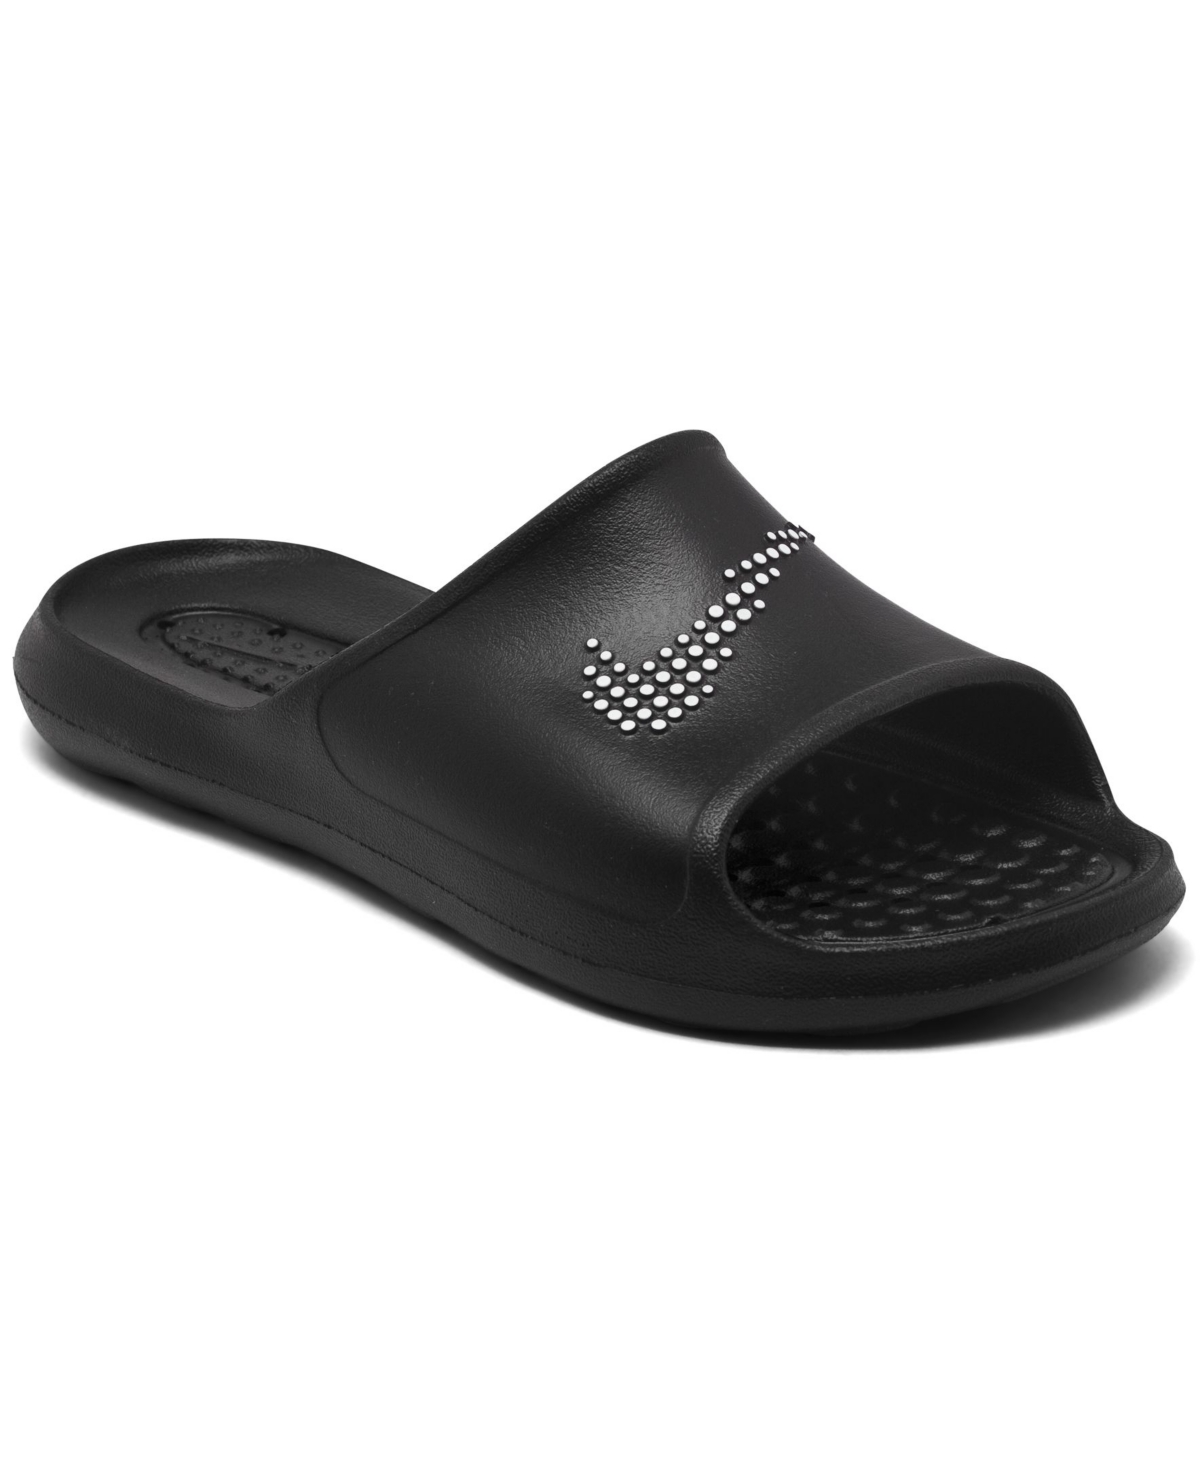 Men's Victori One Shadow Slide Sandals from Finish Line - Black, White